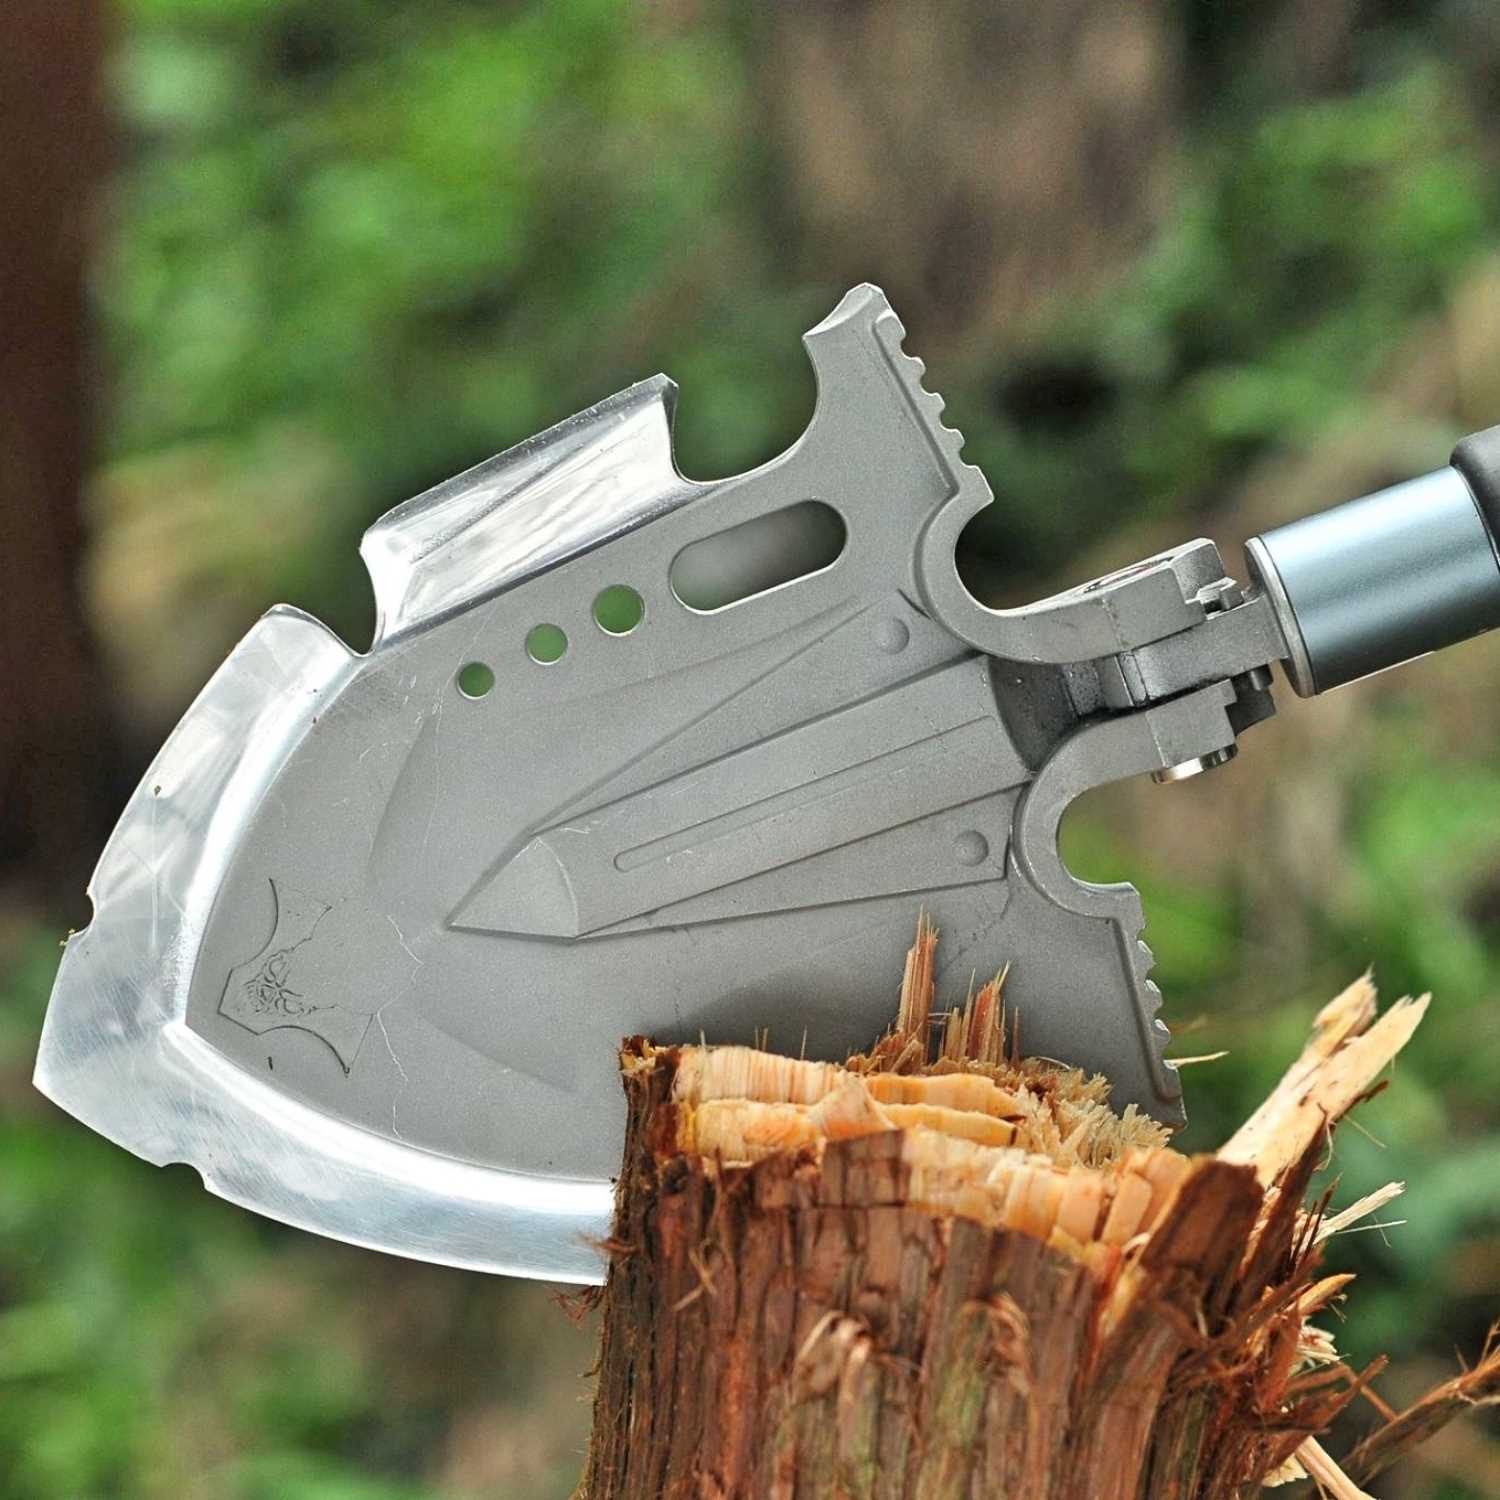 Tactical Gear 24 in 1 Multifunctional Camping Shovel Axe – Badass Xmas Gifts For Him